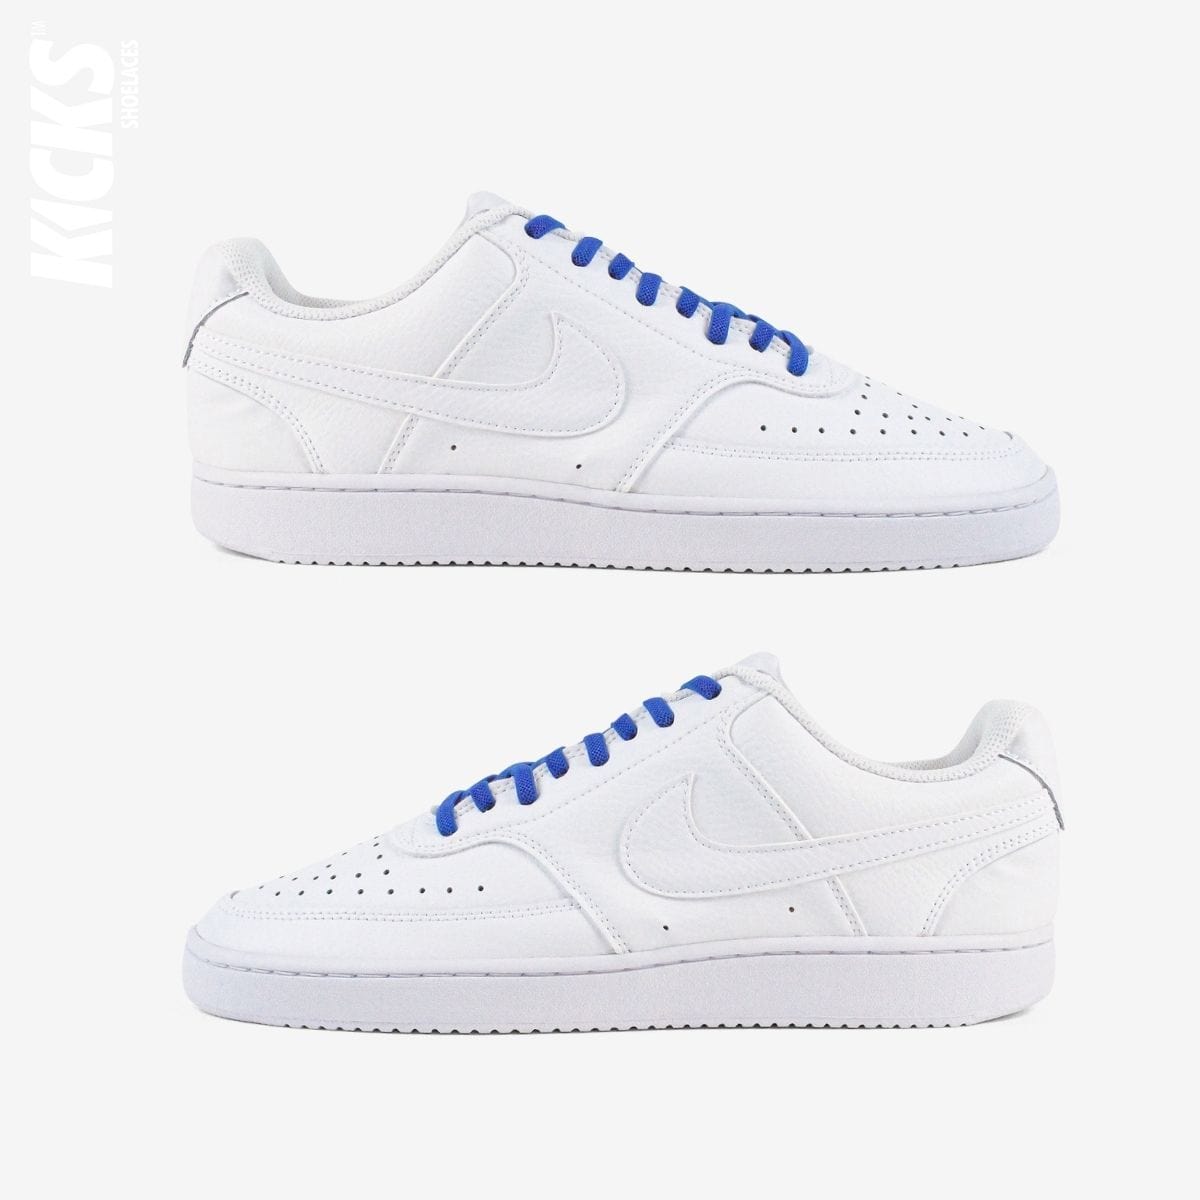 tieless-laces-with-royal-blue-laces-on-nike-white-sneakers-by-kicks-shoelaces